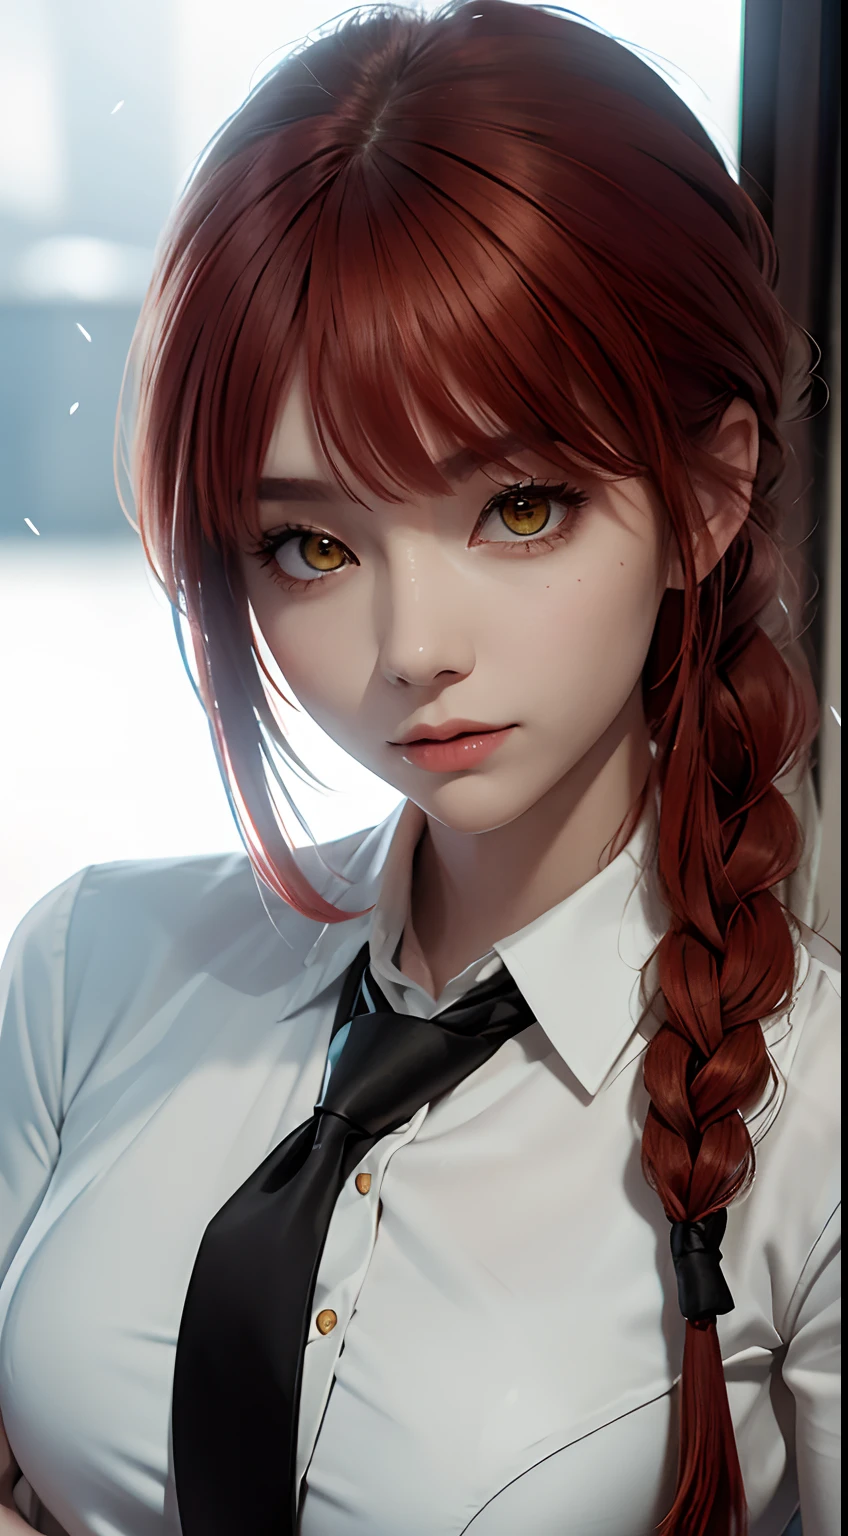 masterpice, best quality,a raw photo of a stylish woman, makima \(chainsaw man\), she is young, she is cute, she is wearing a white shir, (she is wearing a black tie), she has an braid, she has an soft expression, soft smile, she is red haired, (yellow eyes), sensual, gentle, feminine, photorealistic, (perfect face), expressive eyes, award winner image, perfect lighting, great composition, 4k, perfect color scheme,asthetic, volumetric, perfect skin, badass,